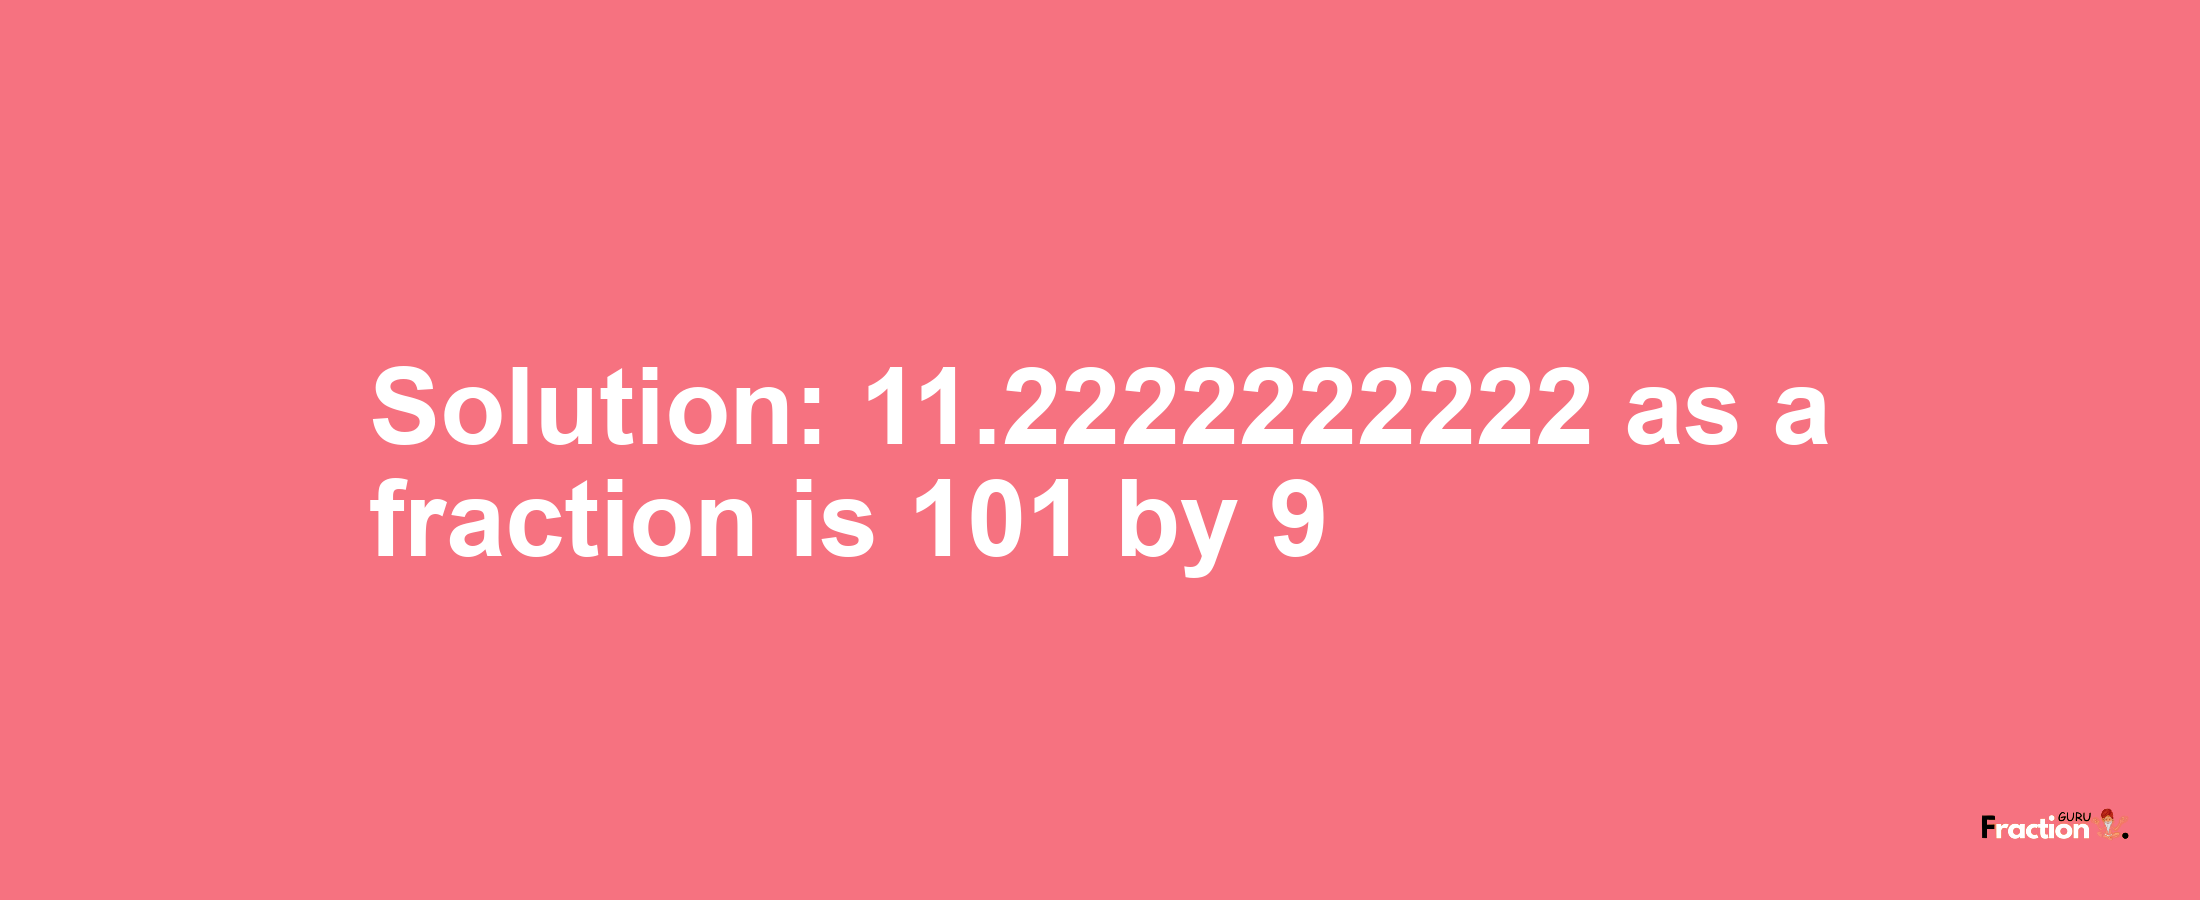 Solution:11.2222222222 as a fraction is 101/9